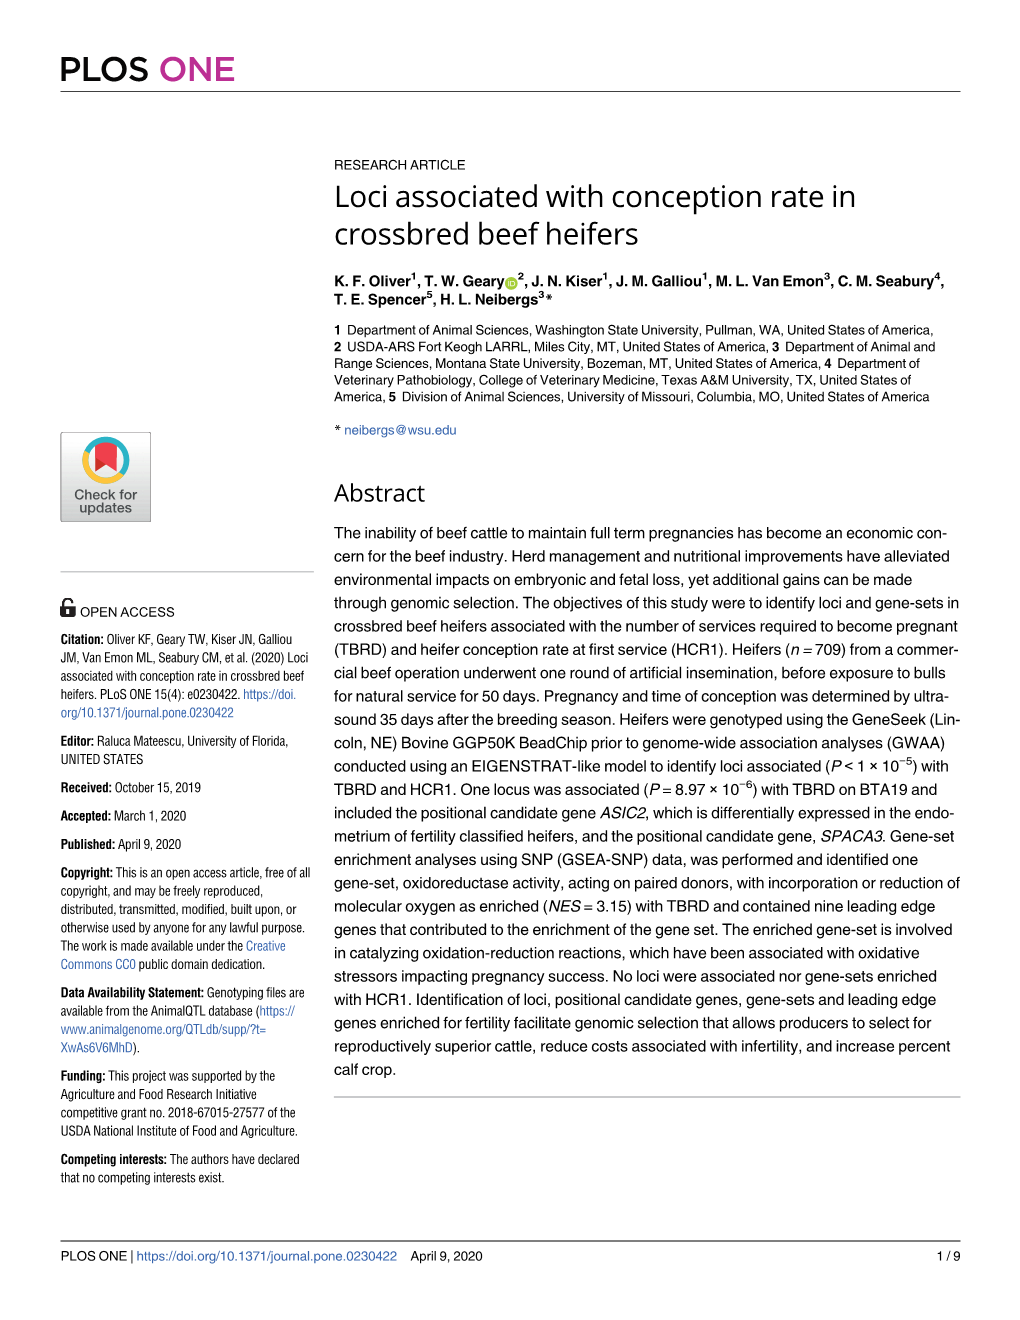 Loci Associated with Conception Rate in Crossbred Beef Heifers